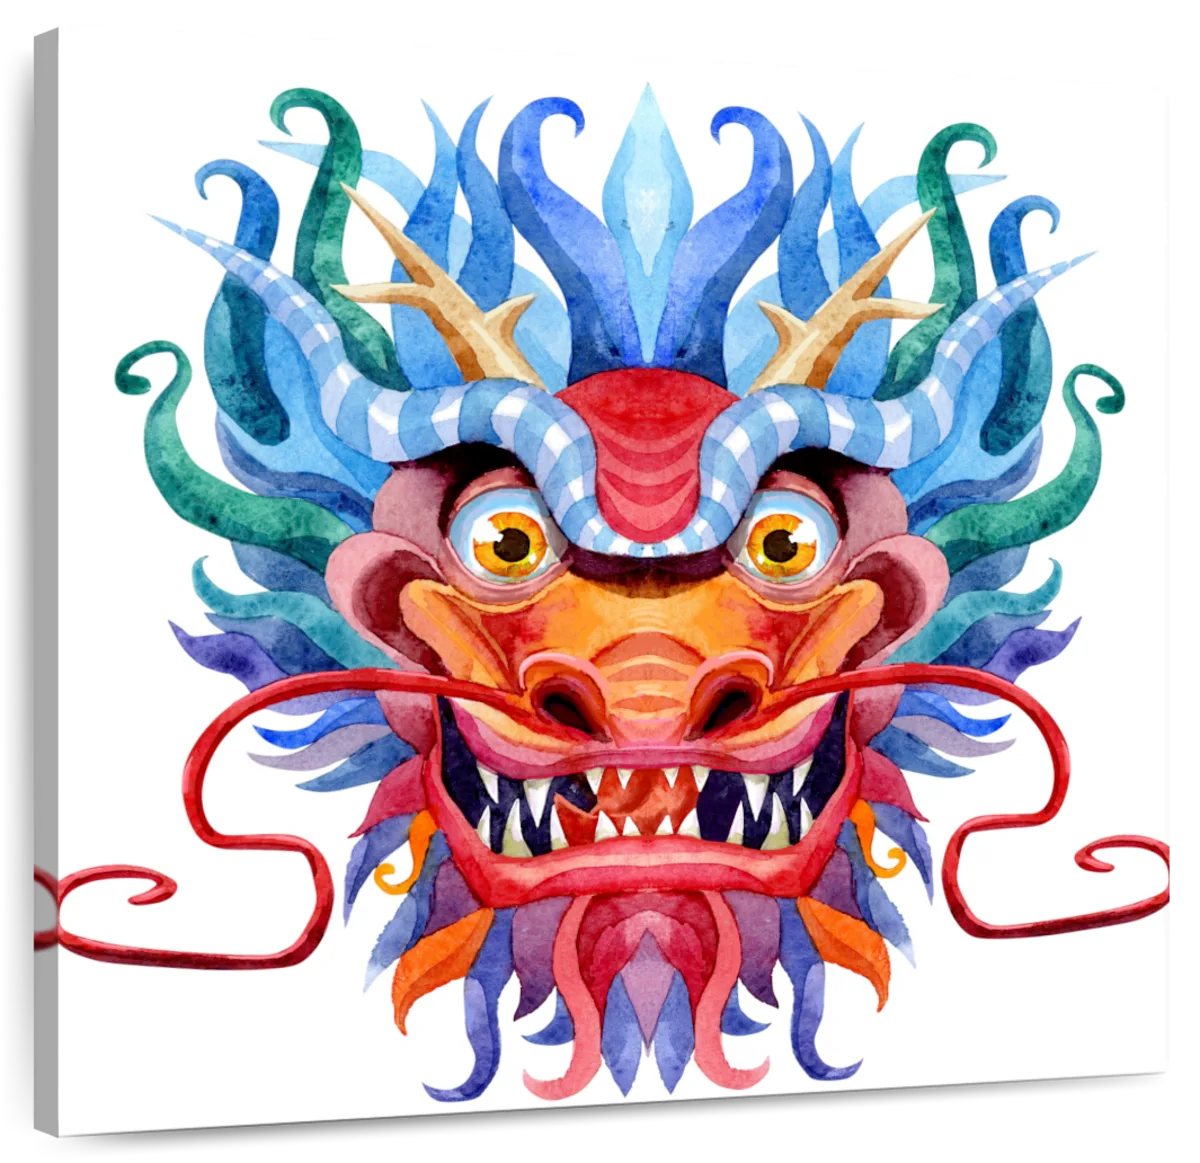 A Chinese dragon head made of wood, dragon head with a